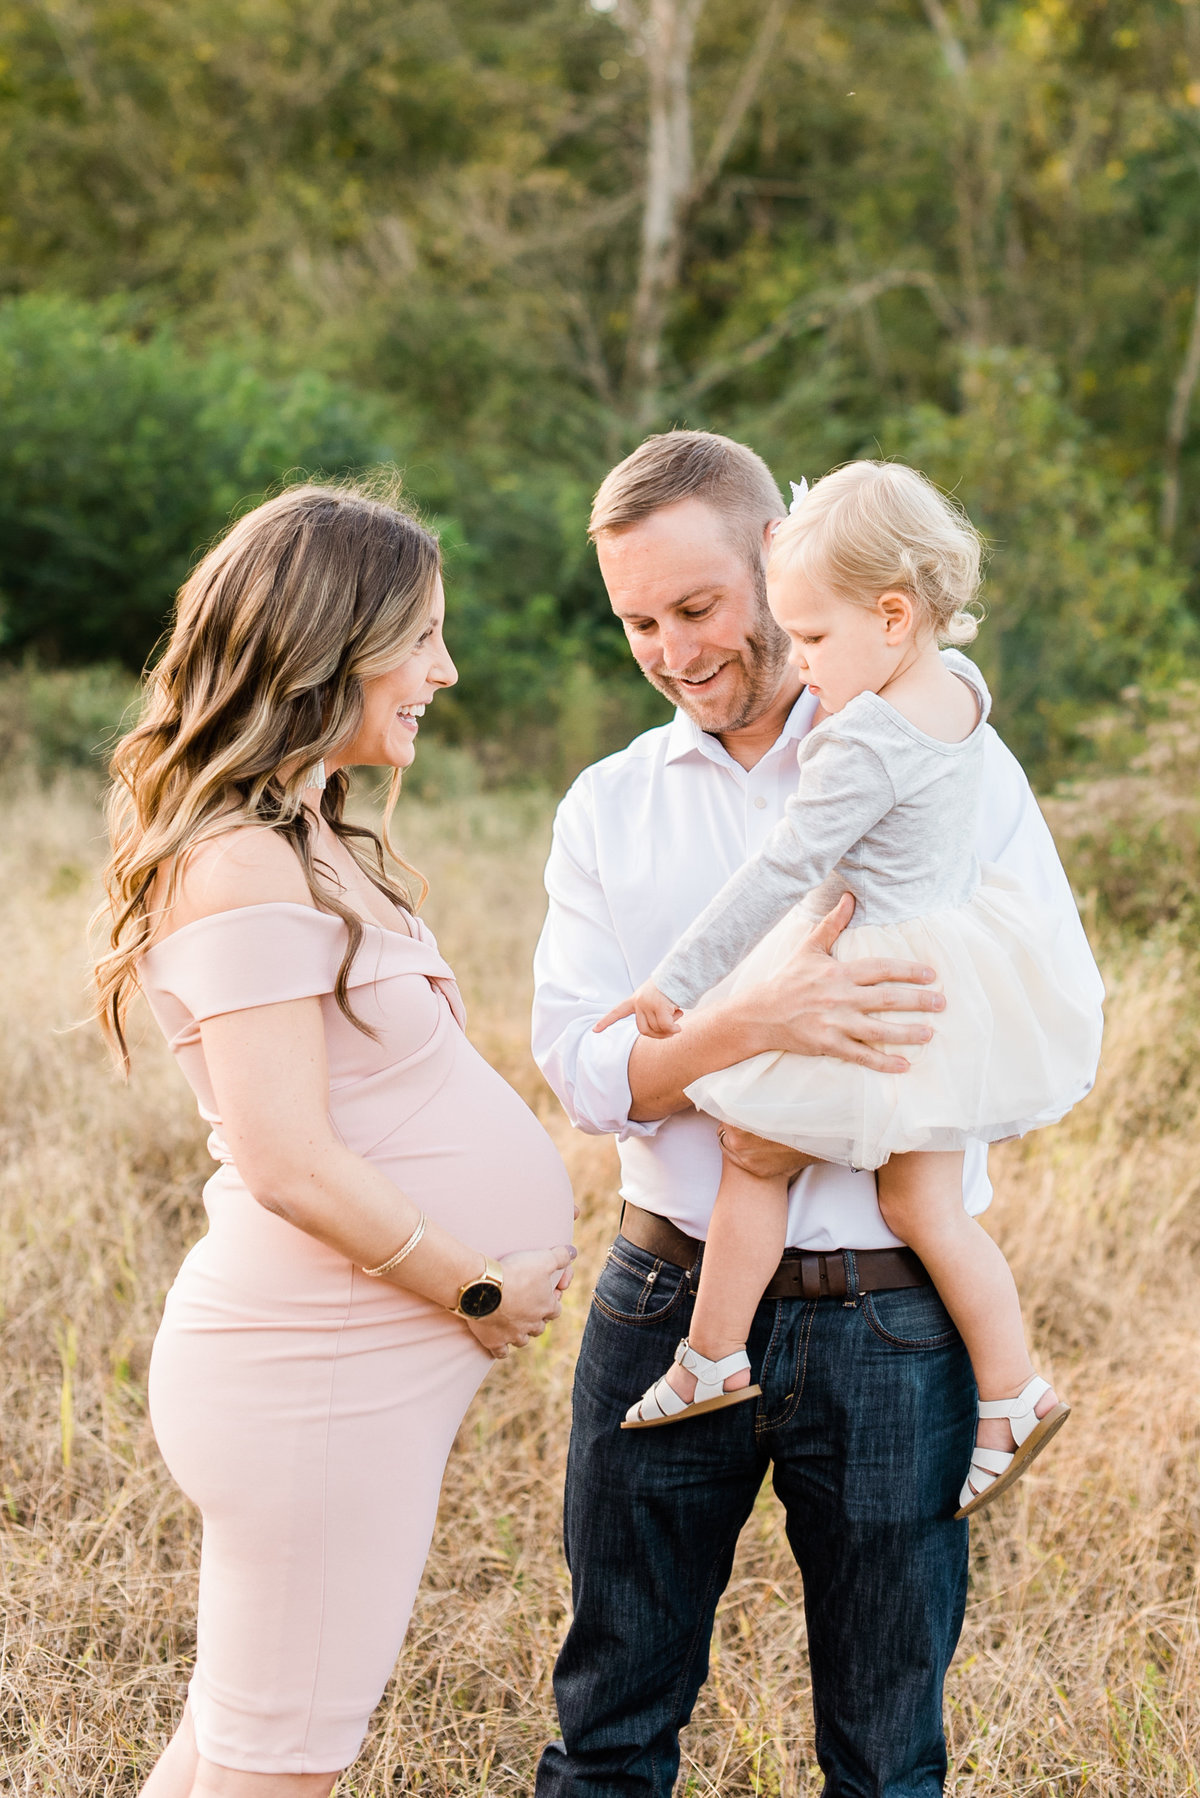 Dad holds toddler while she points at her mom's pregnant belly during a Raleigh maternity photo session. Photographed by Raleigh Maternity Photographer A.J. Dunlap Photography.